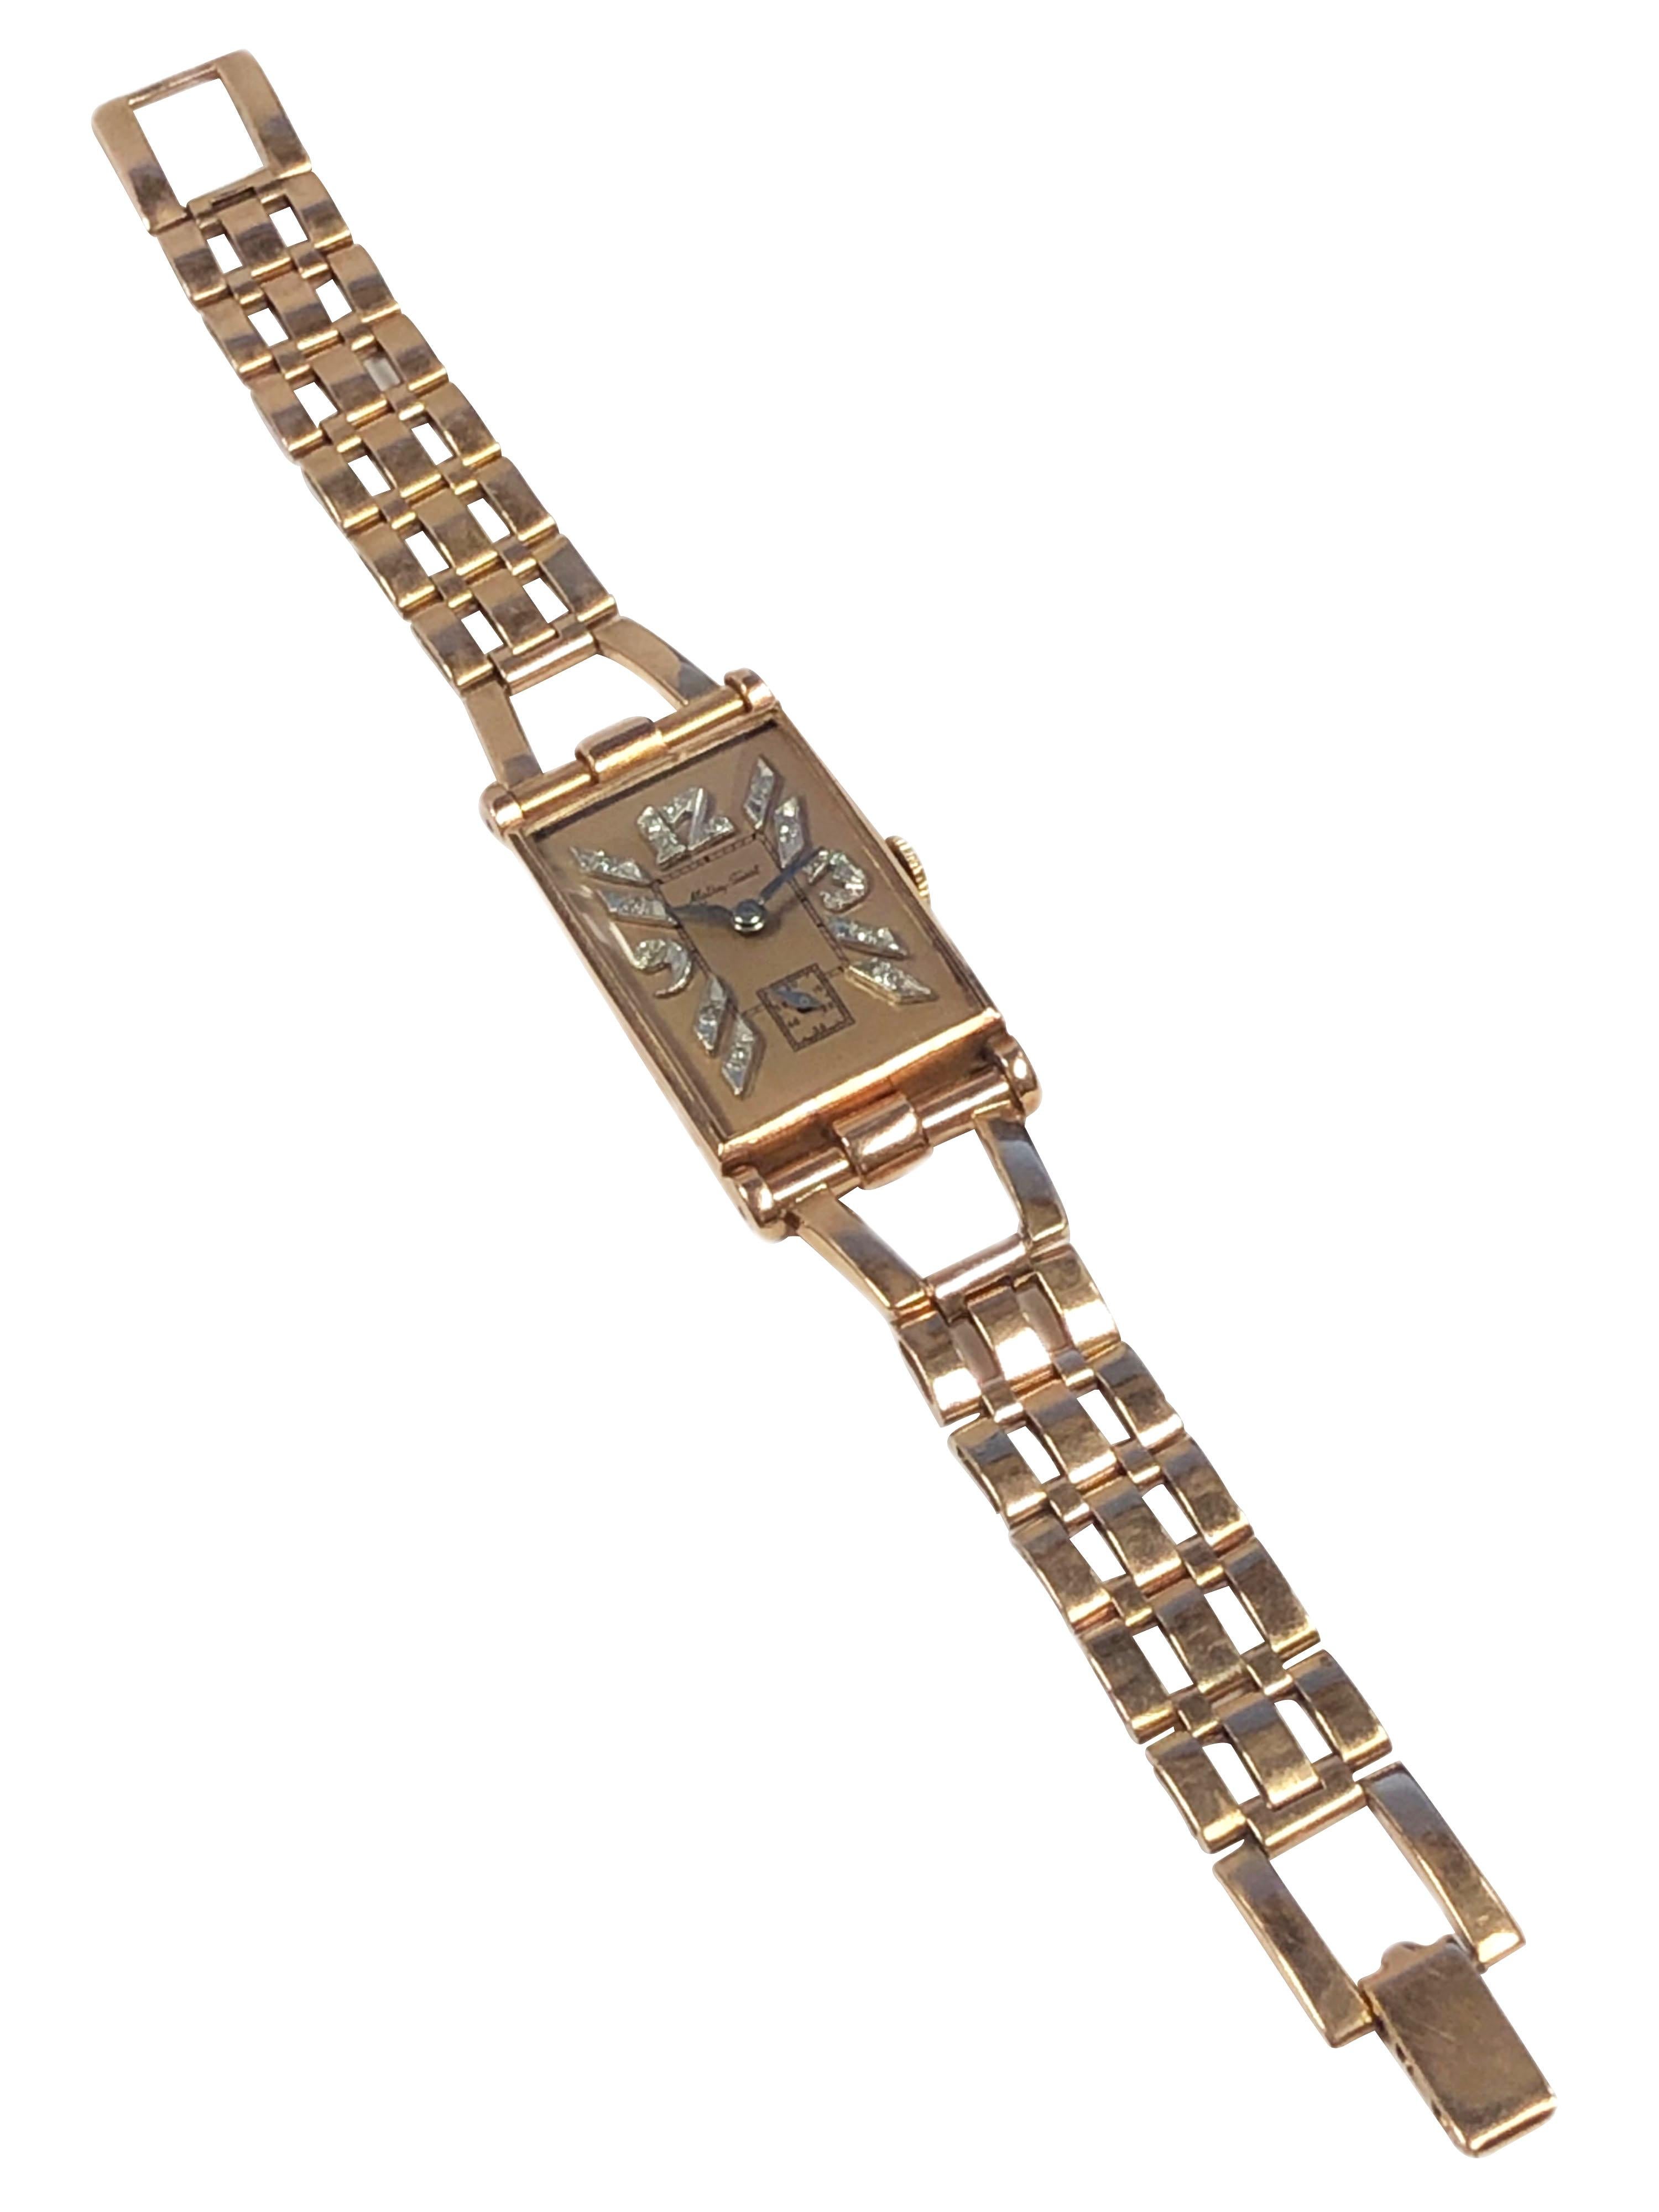 Mathey Tissot 1940s Retro Rose Gold and Diamond Dial Mechanical Bracelet Watch In Excellent Condition For Sale In Chicago, IL